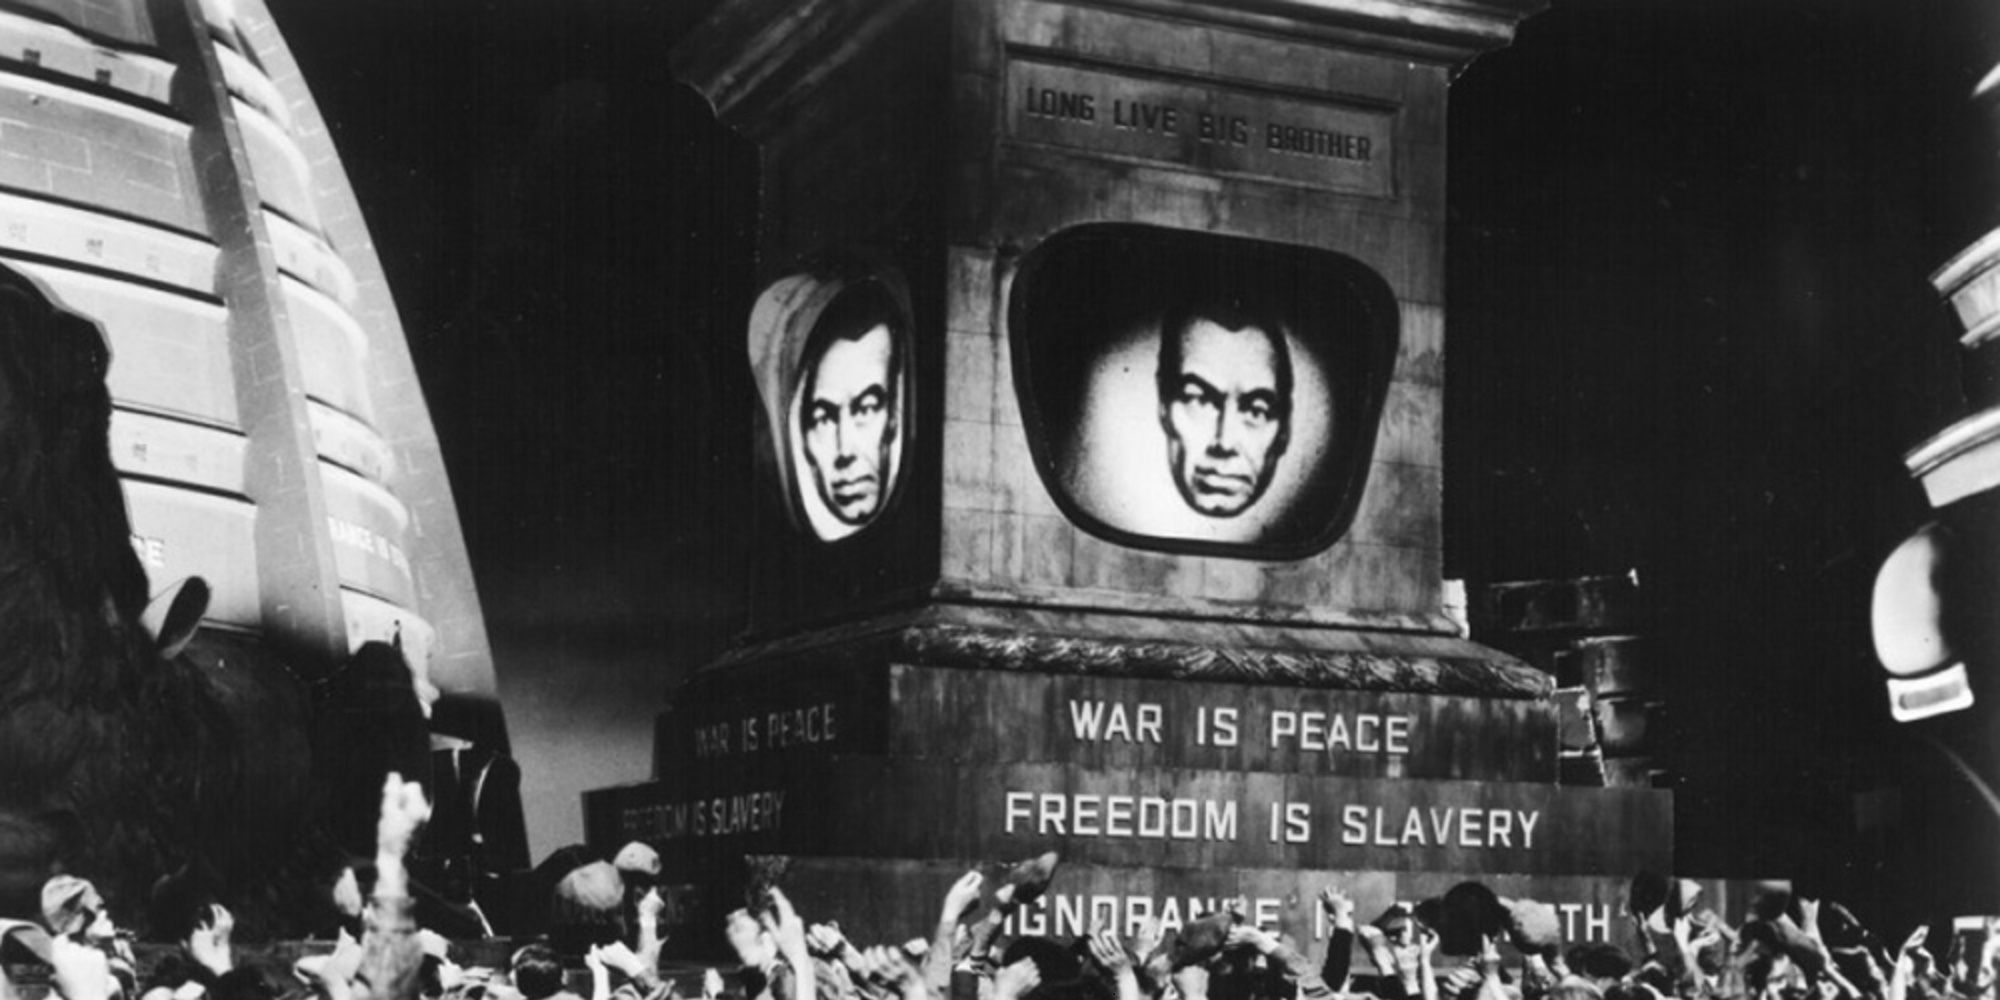 1956 movie of 1984 by George Orwell, showing Big Brother on a screen